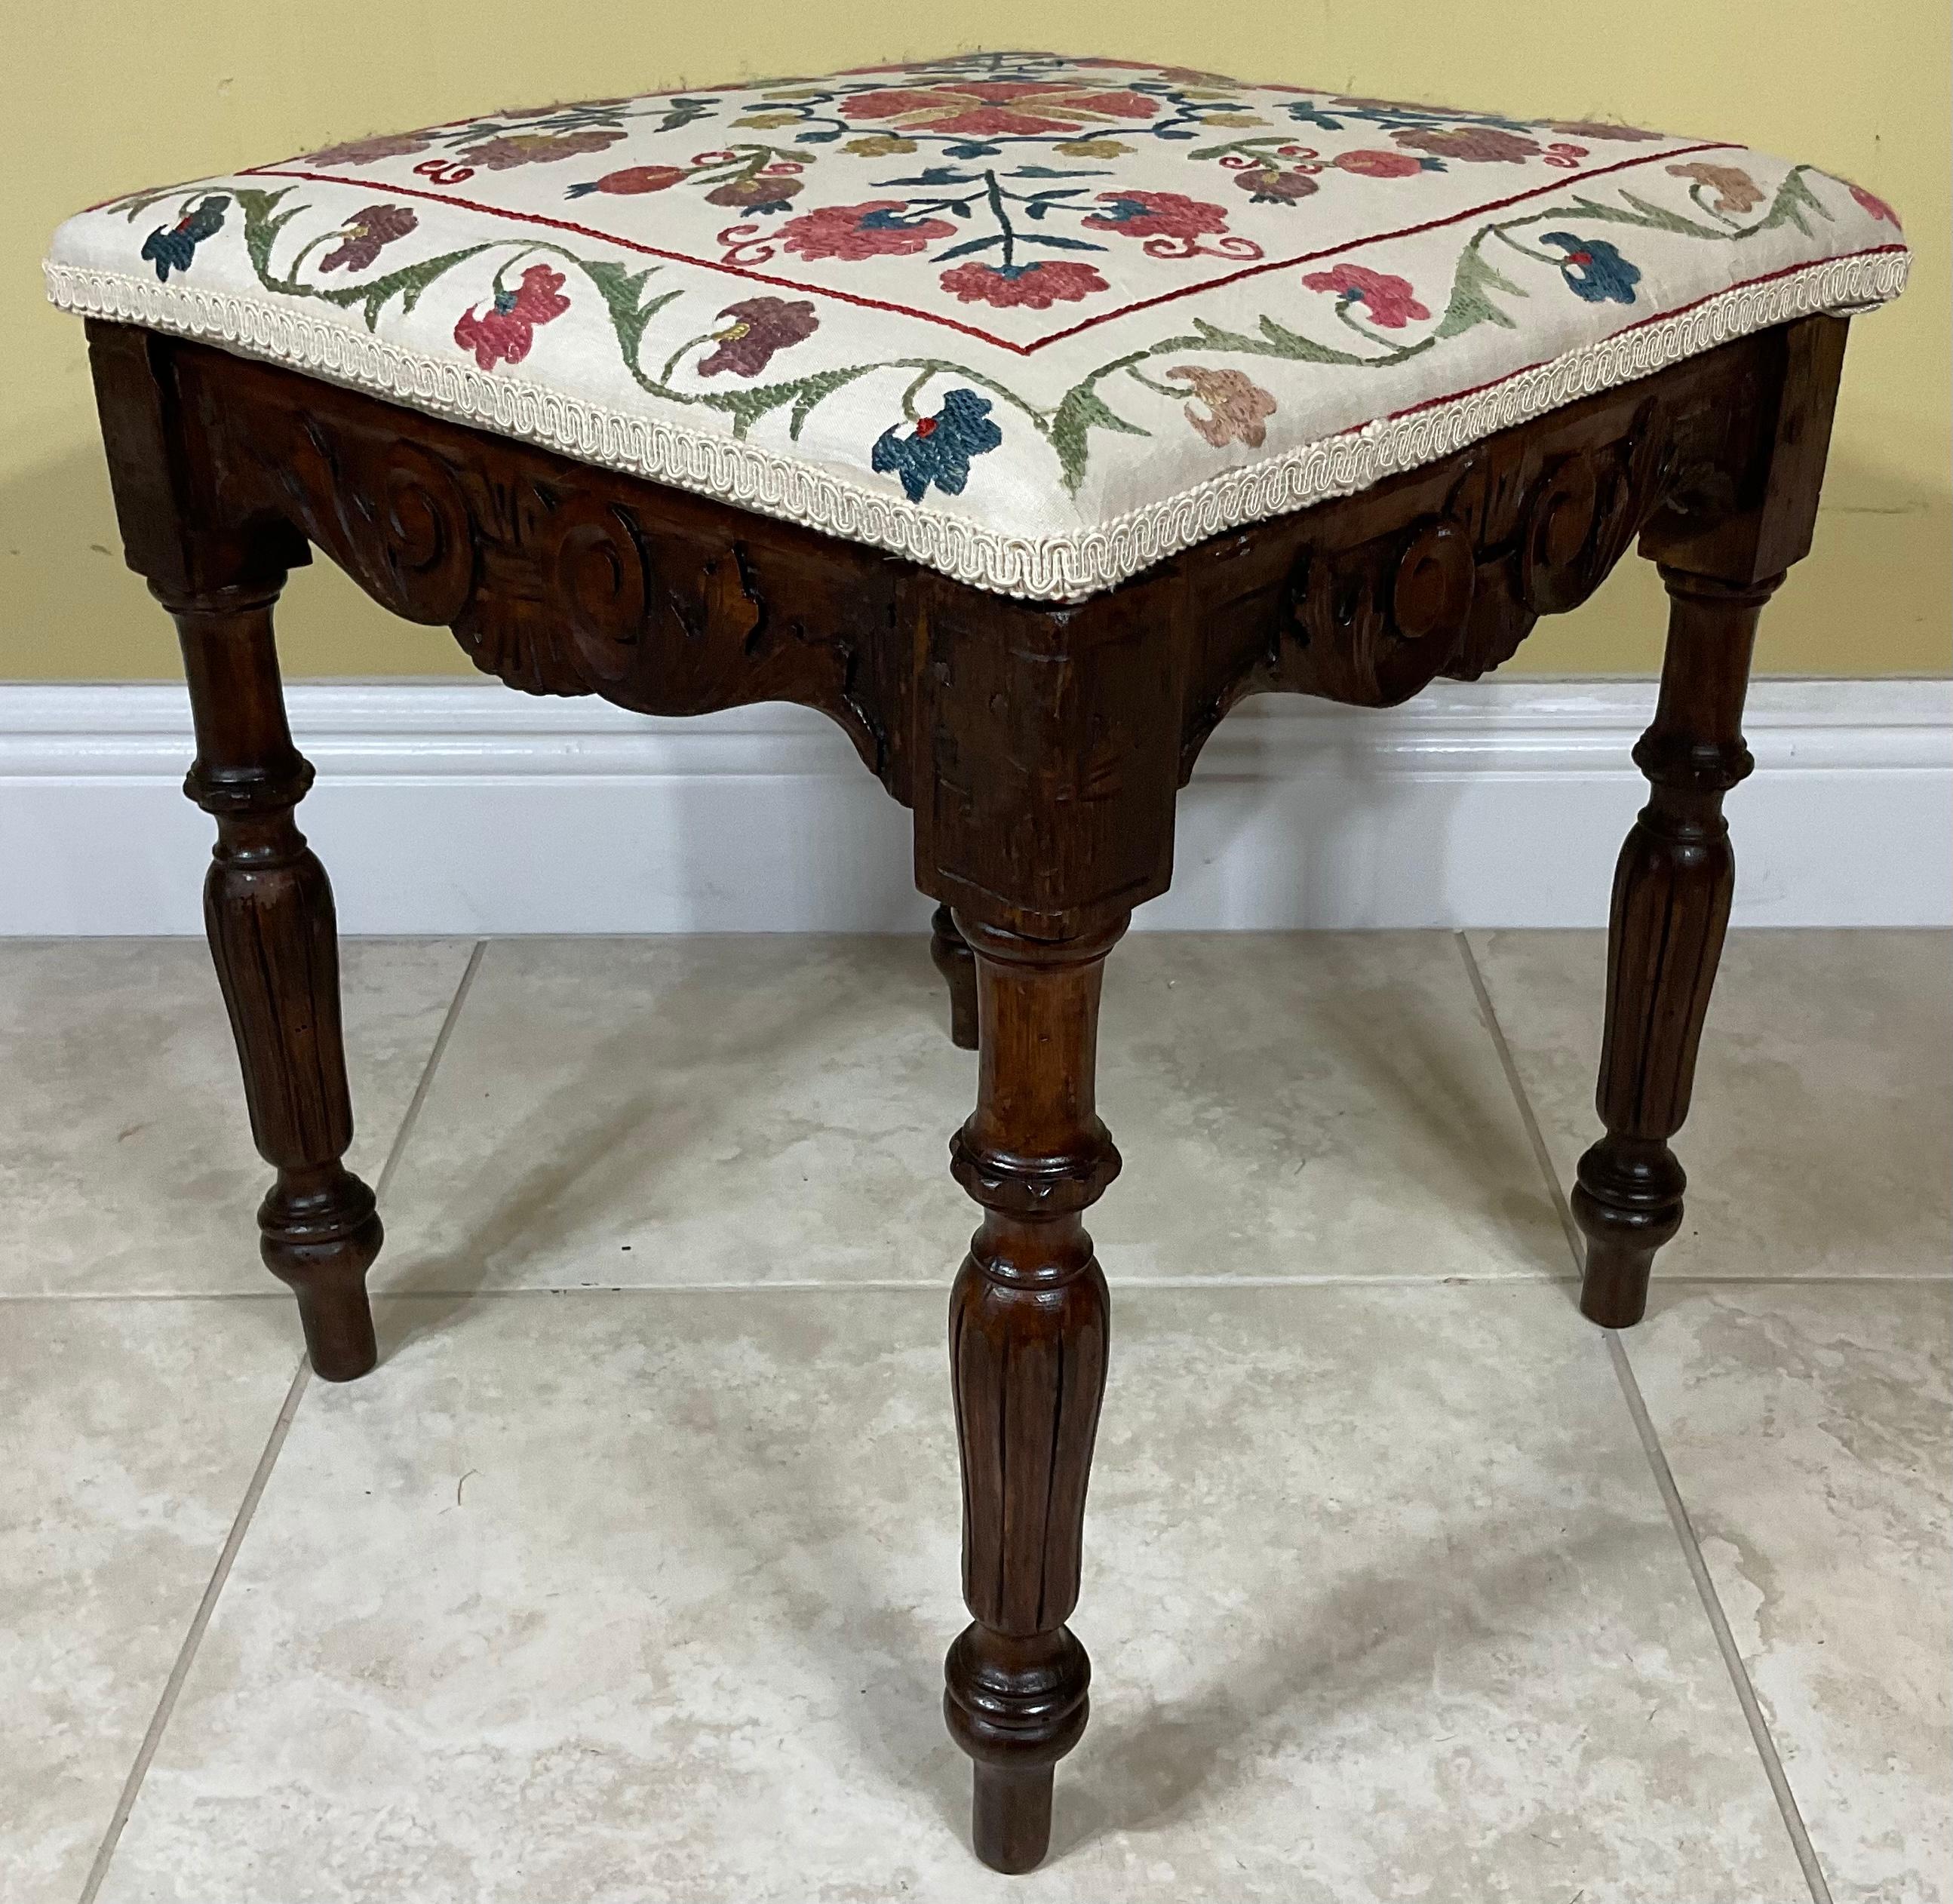 Early 20th Century Vintage Hand Embroidery Suzani Textile Upholstered Low Stool